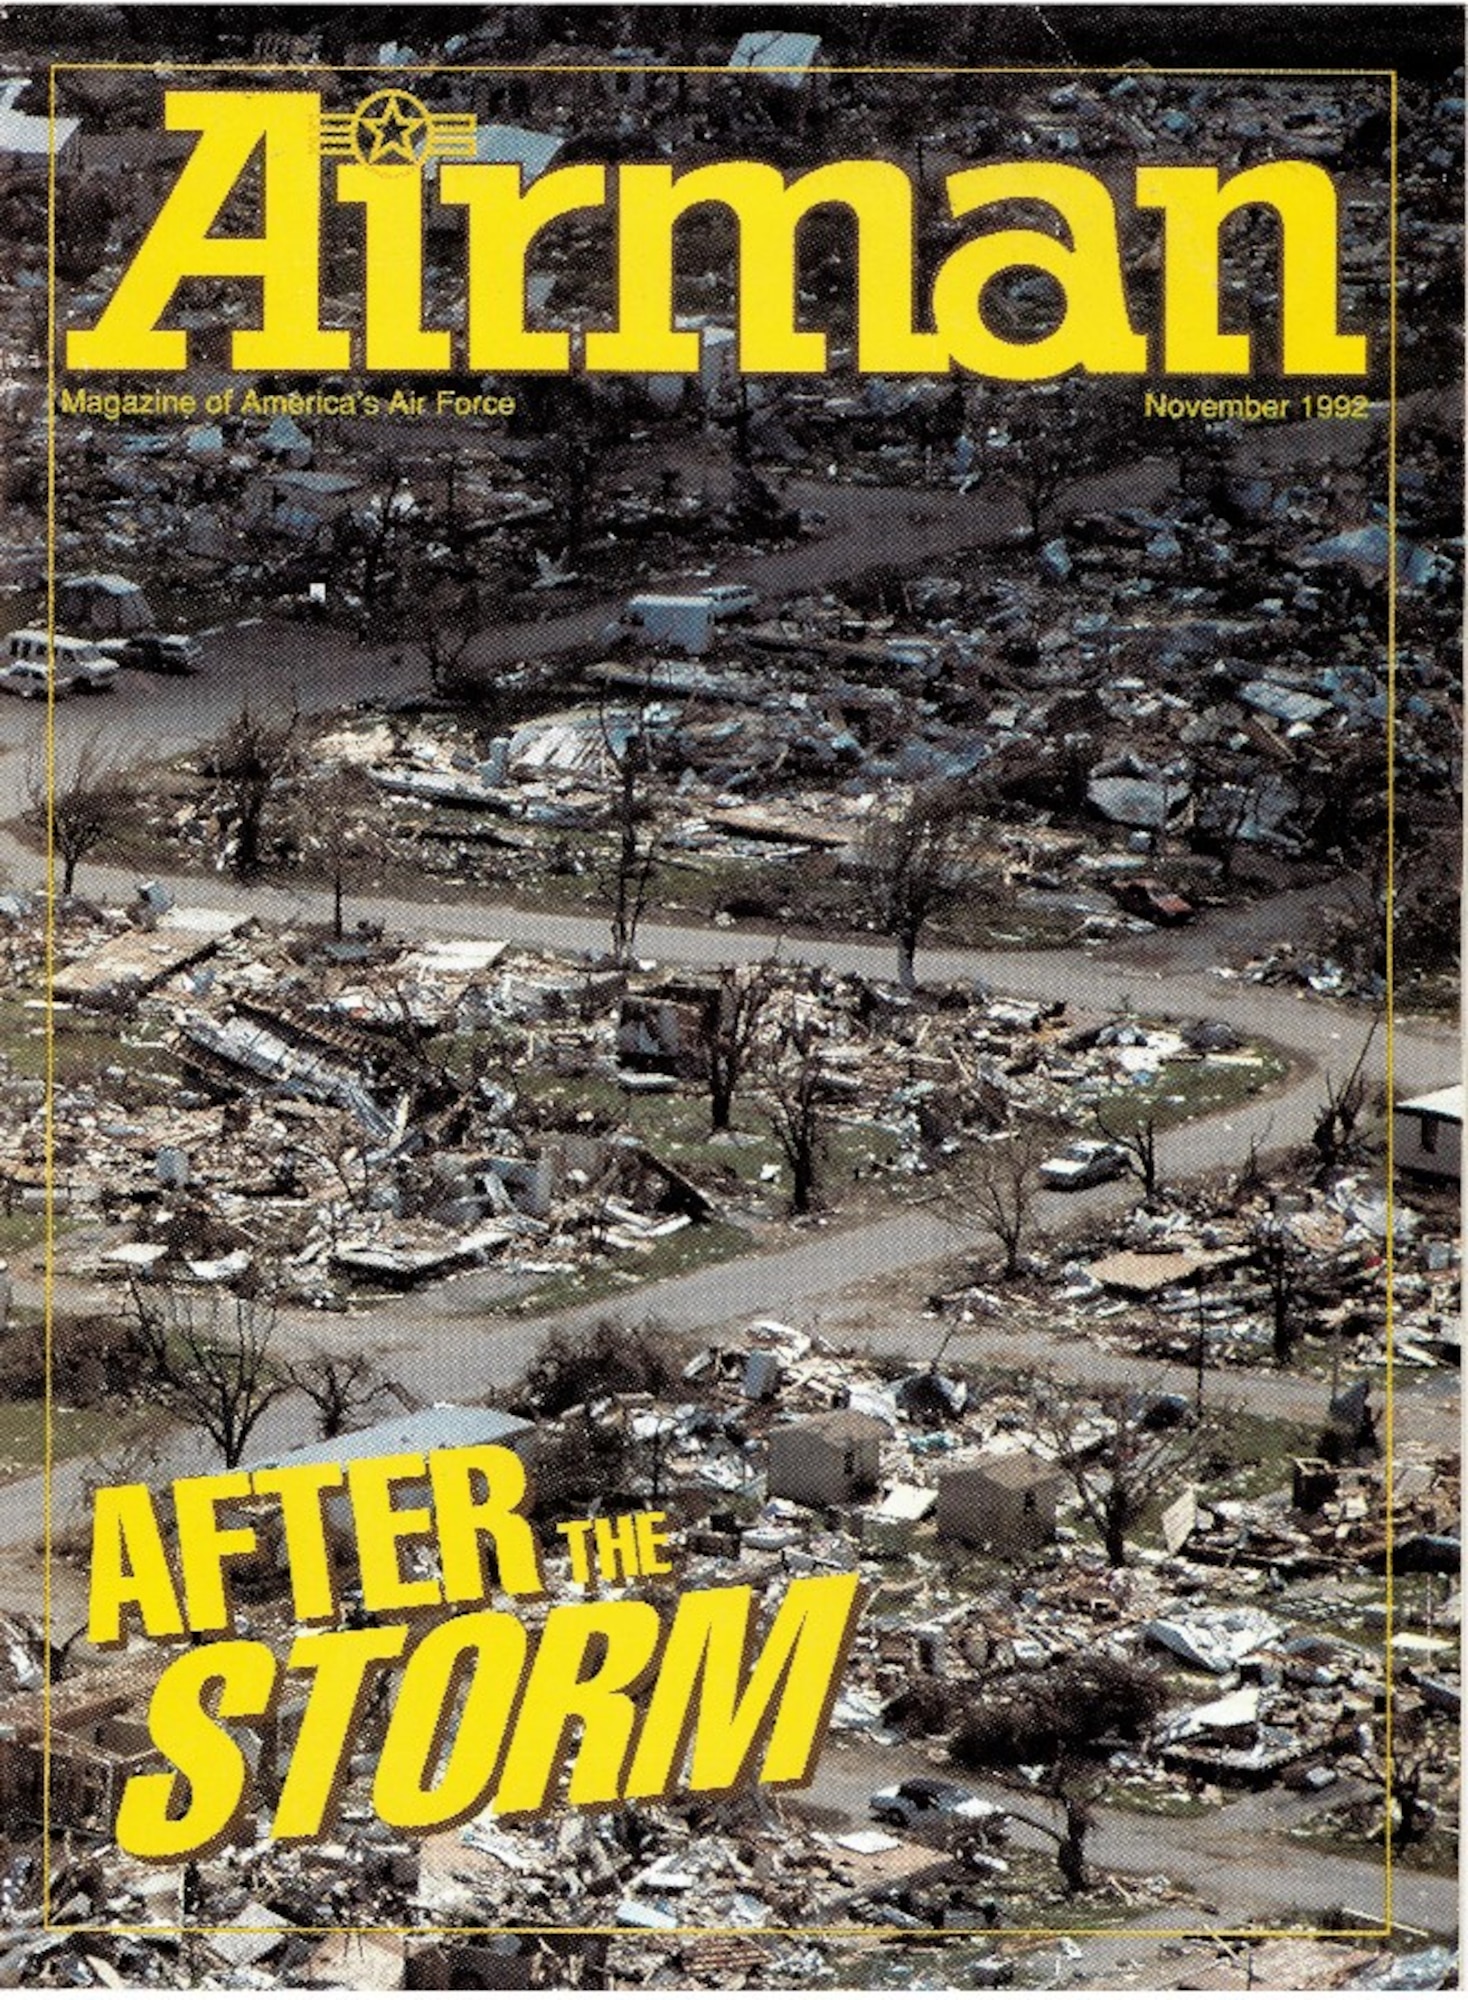 The November 1992 front cover of Airman Magazine spotlighted the shocking destruction of Hurricane Andrew.